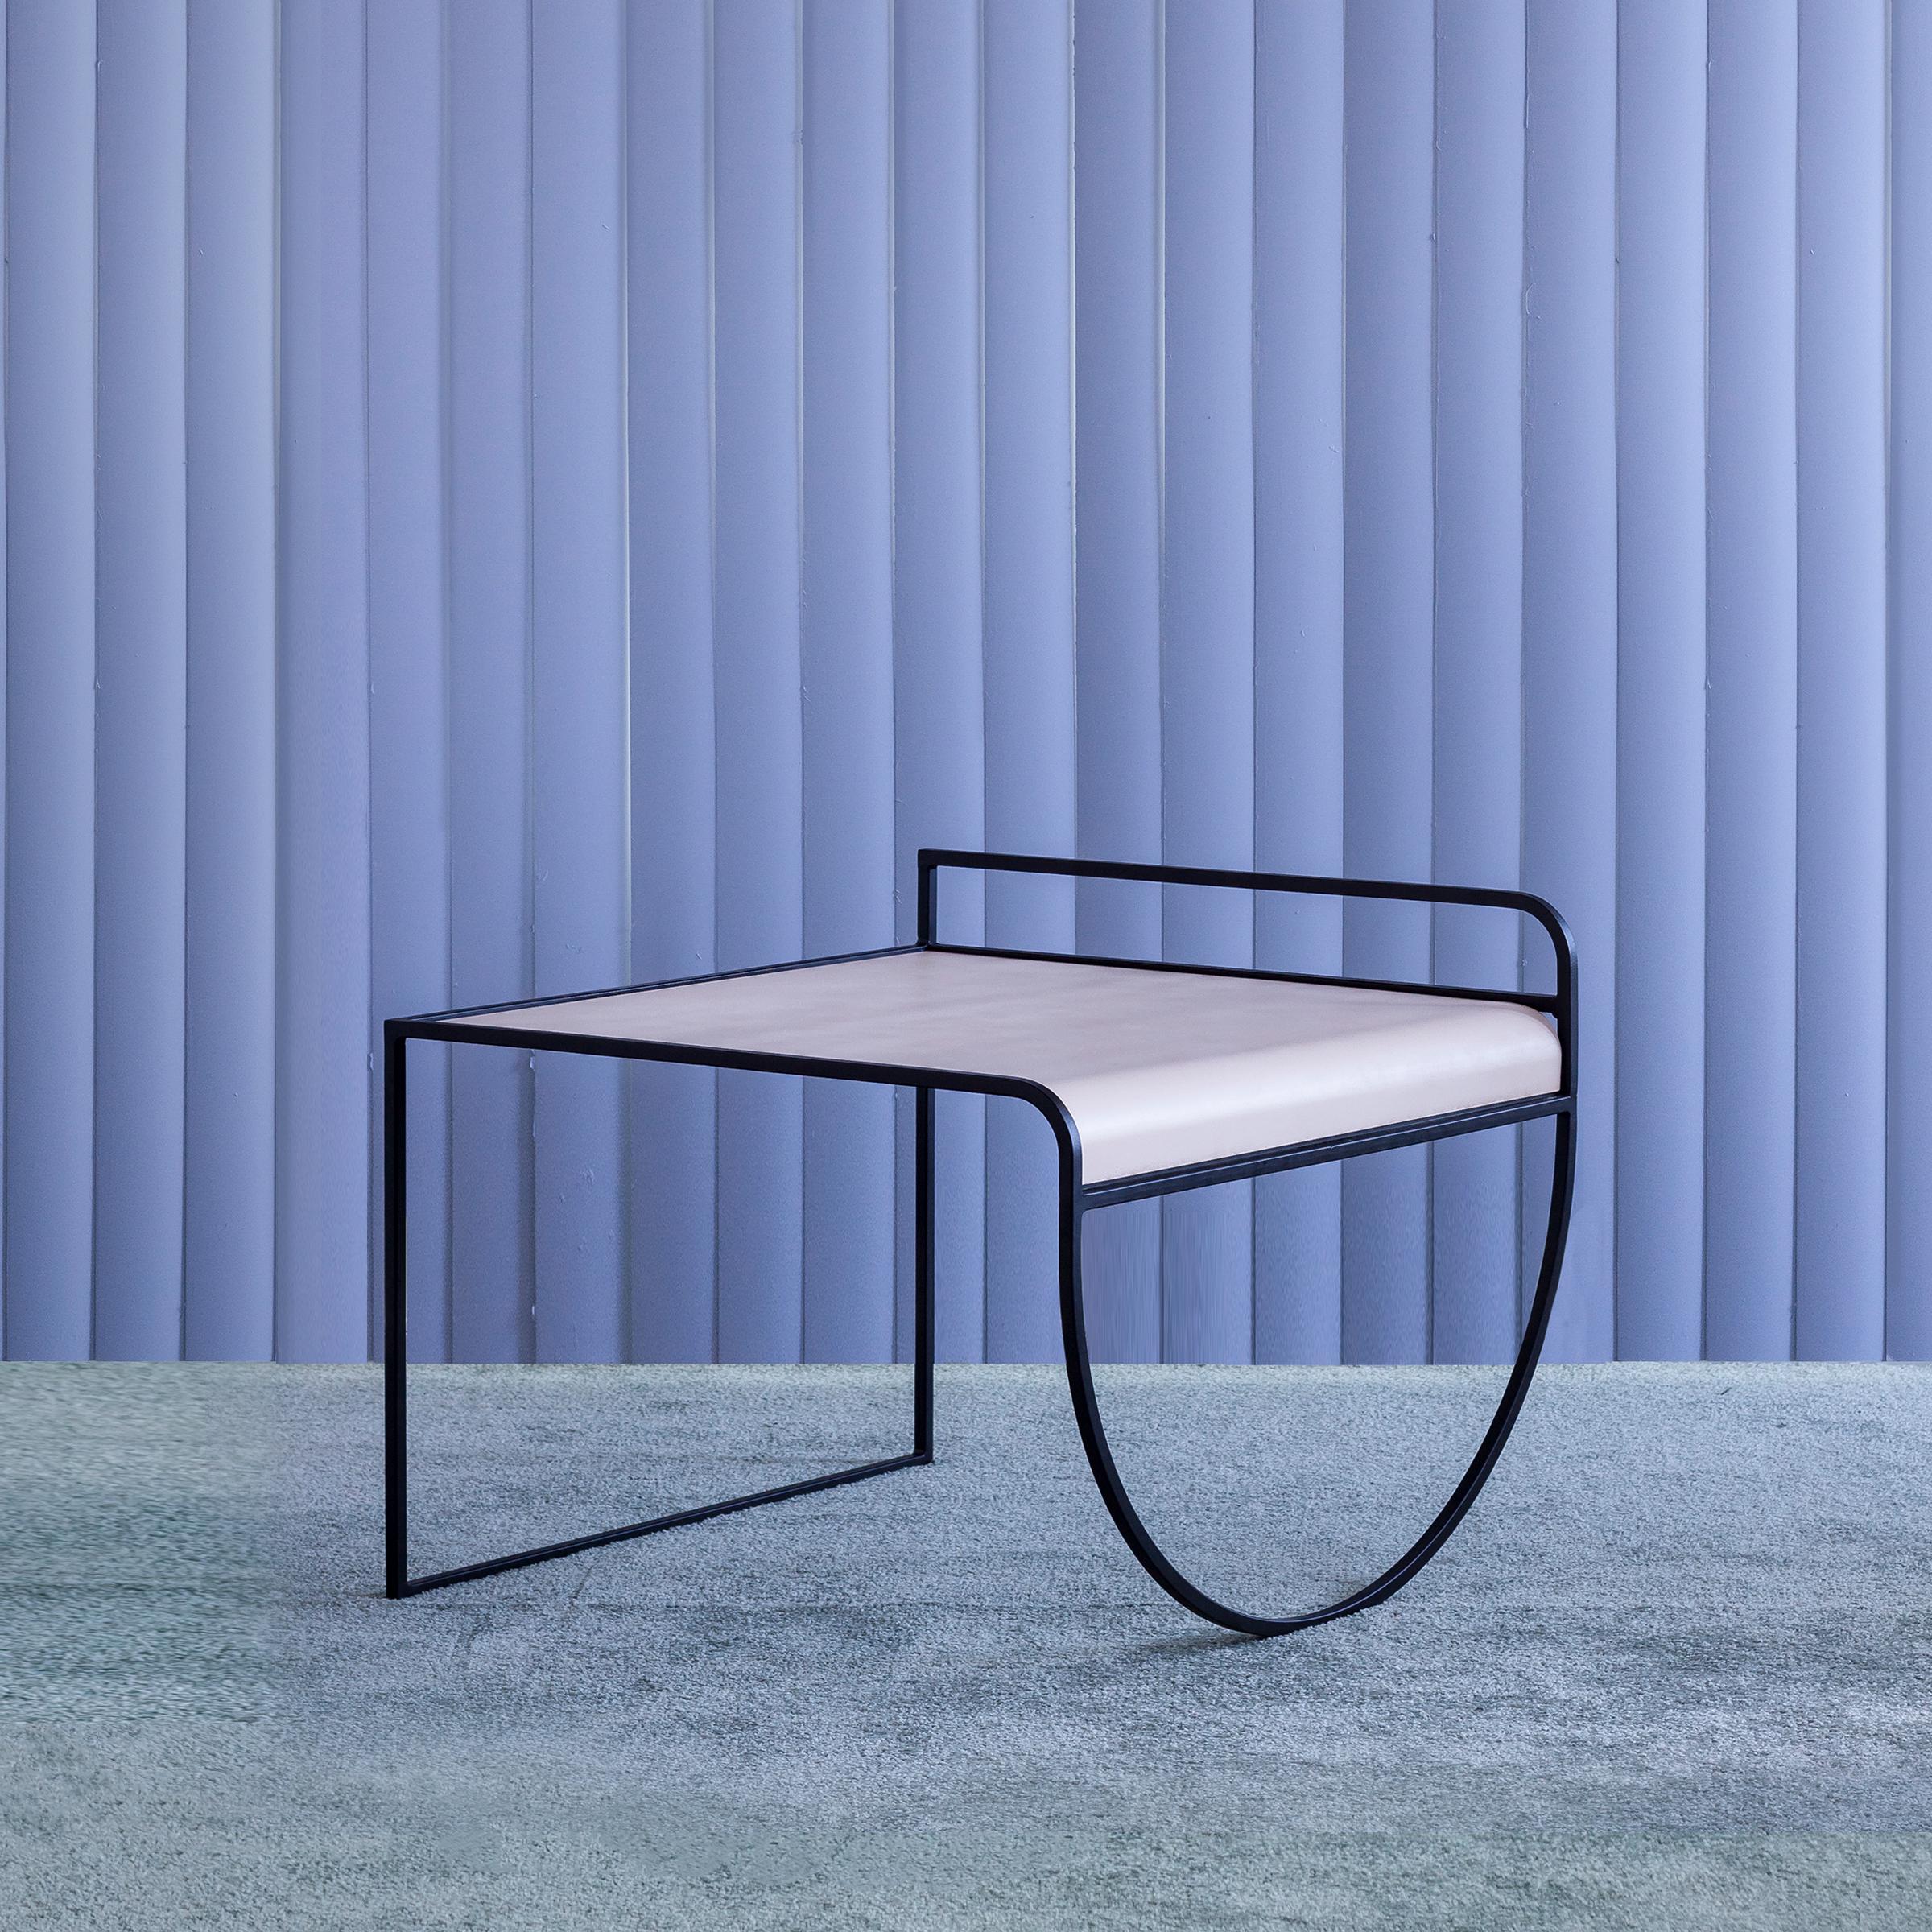 SW side table by soft-geometry
Materials: Powder coat steel frame with a flat, Bent steel top
Dimensions: 26 x 24.5 x 20” H  

Modern metal side table with a belly, featuring a fluid powder coat steel frame with a flat, bent steel top. The sw side